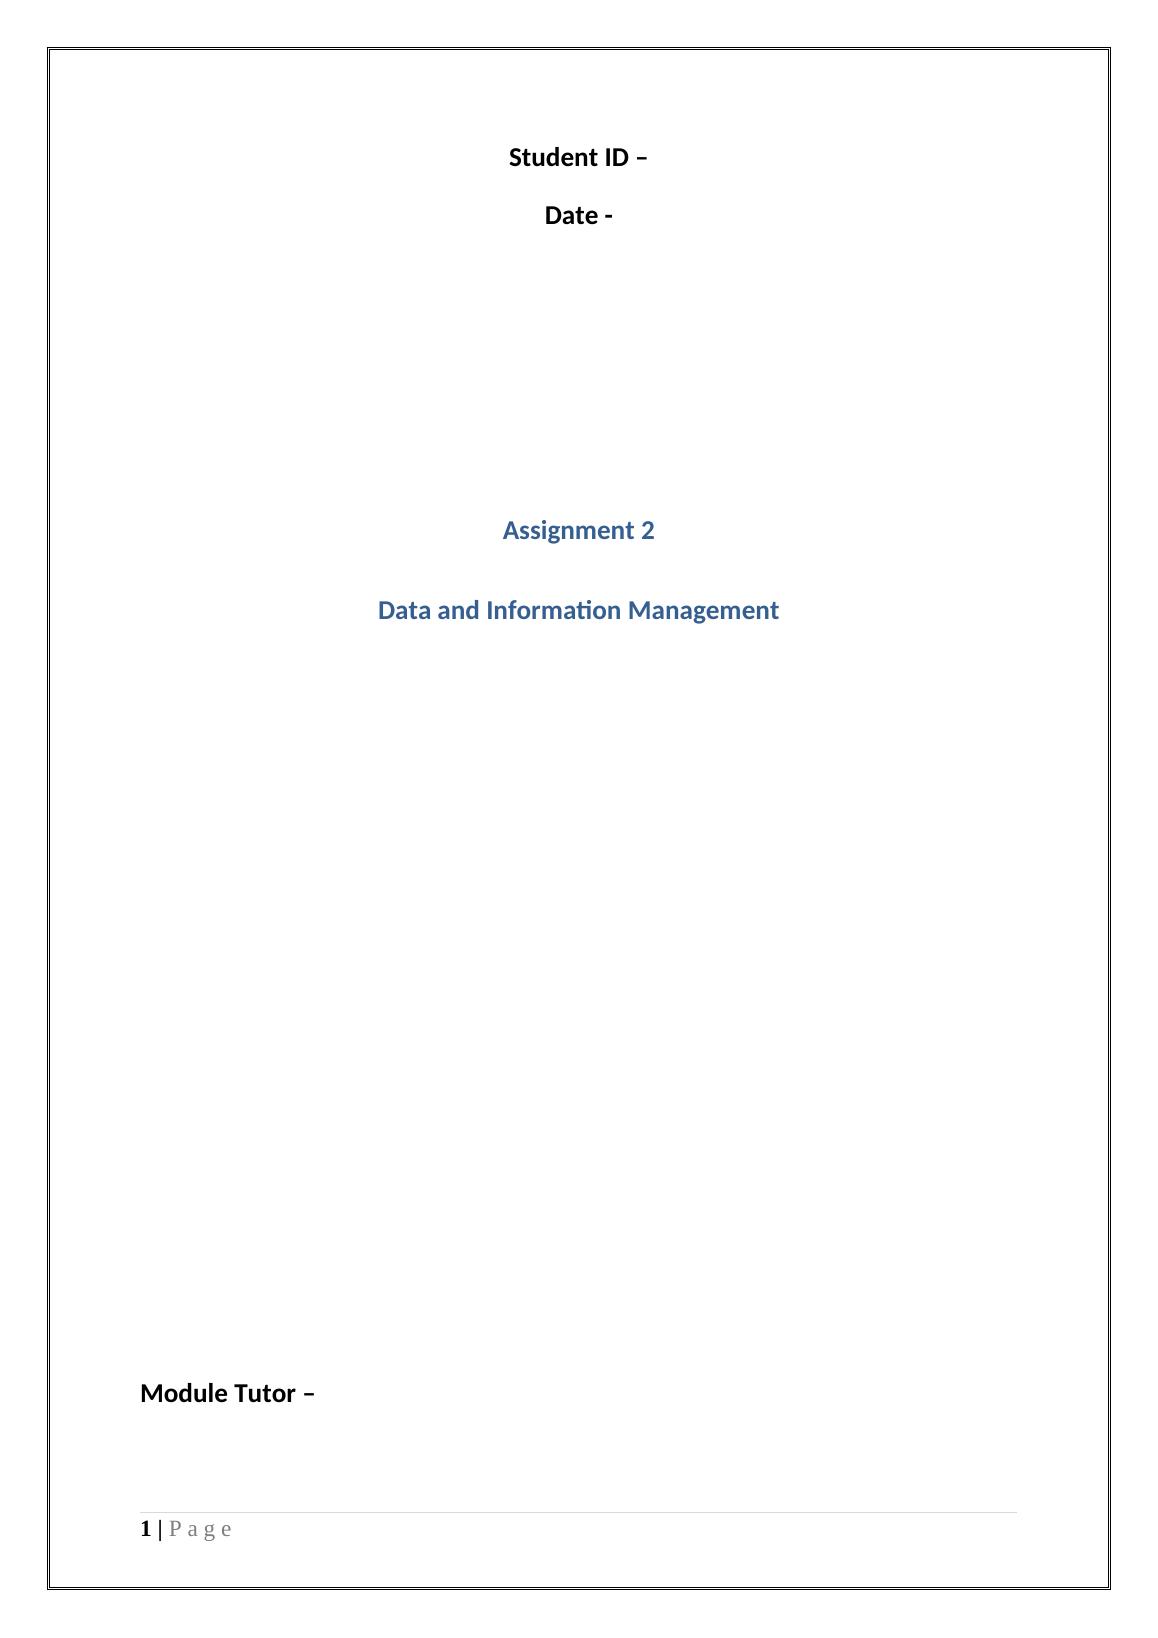 Data and Information Management- Doc_1